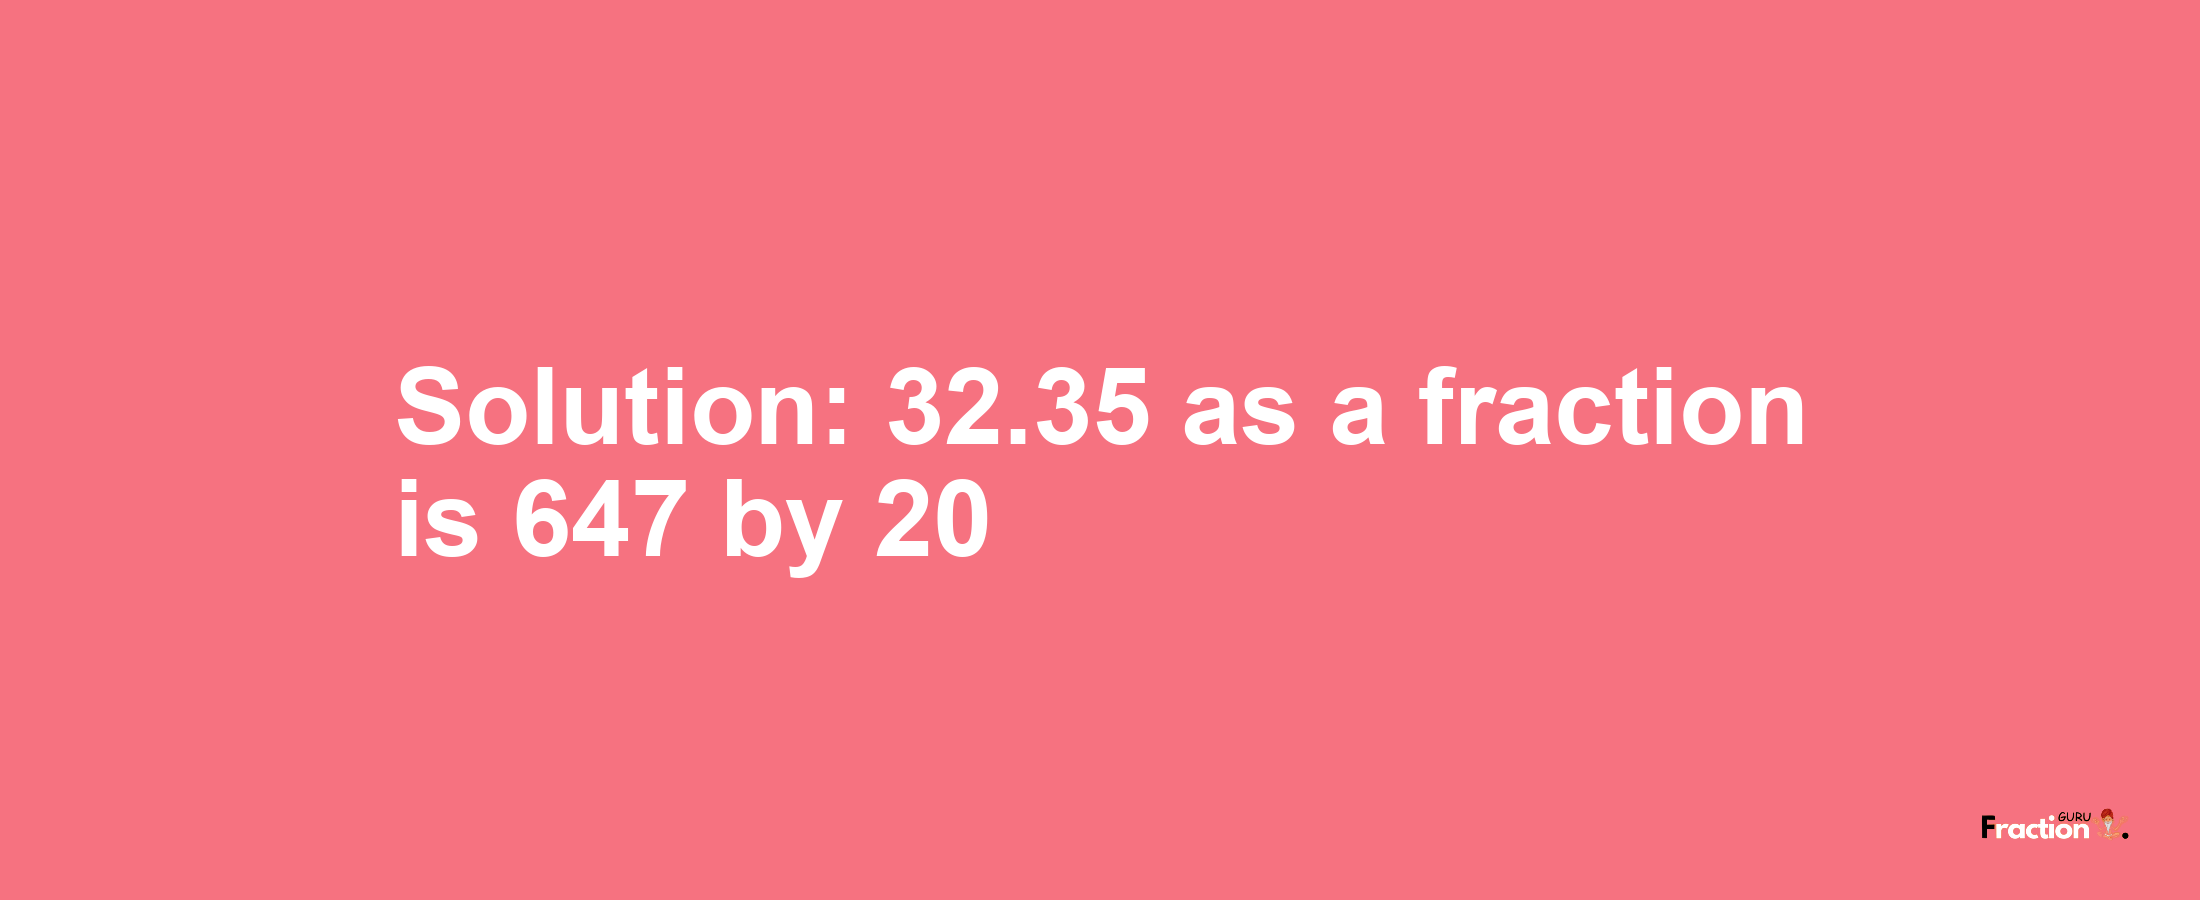 Solution:32.35 as a fraction is 647/20